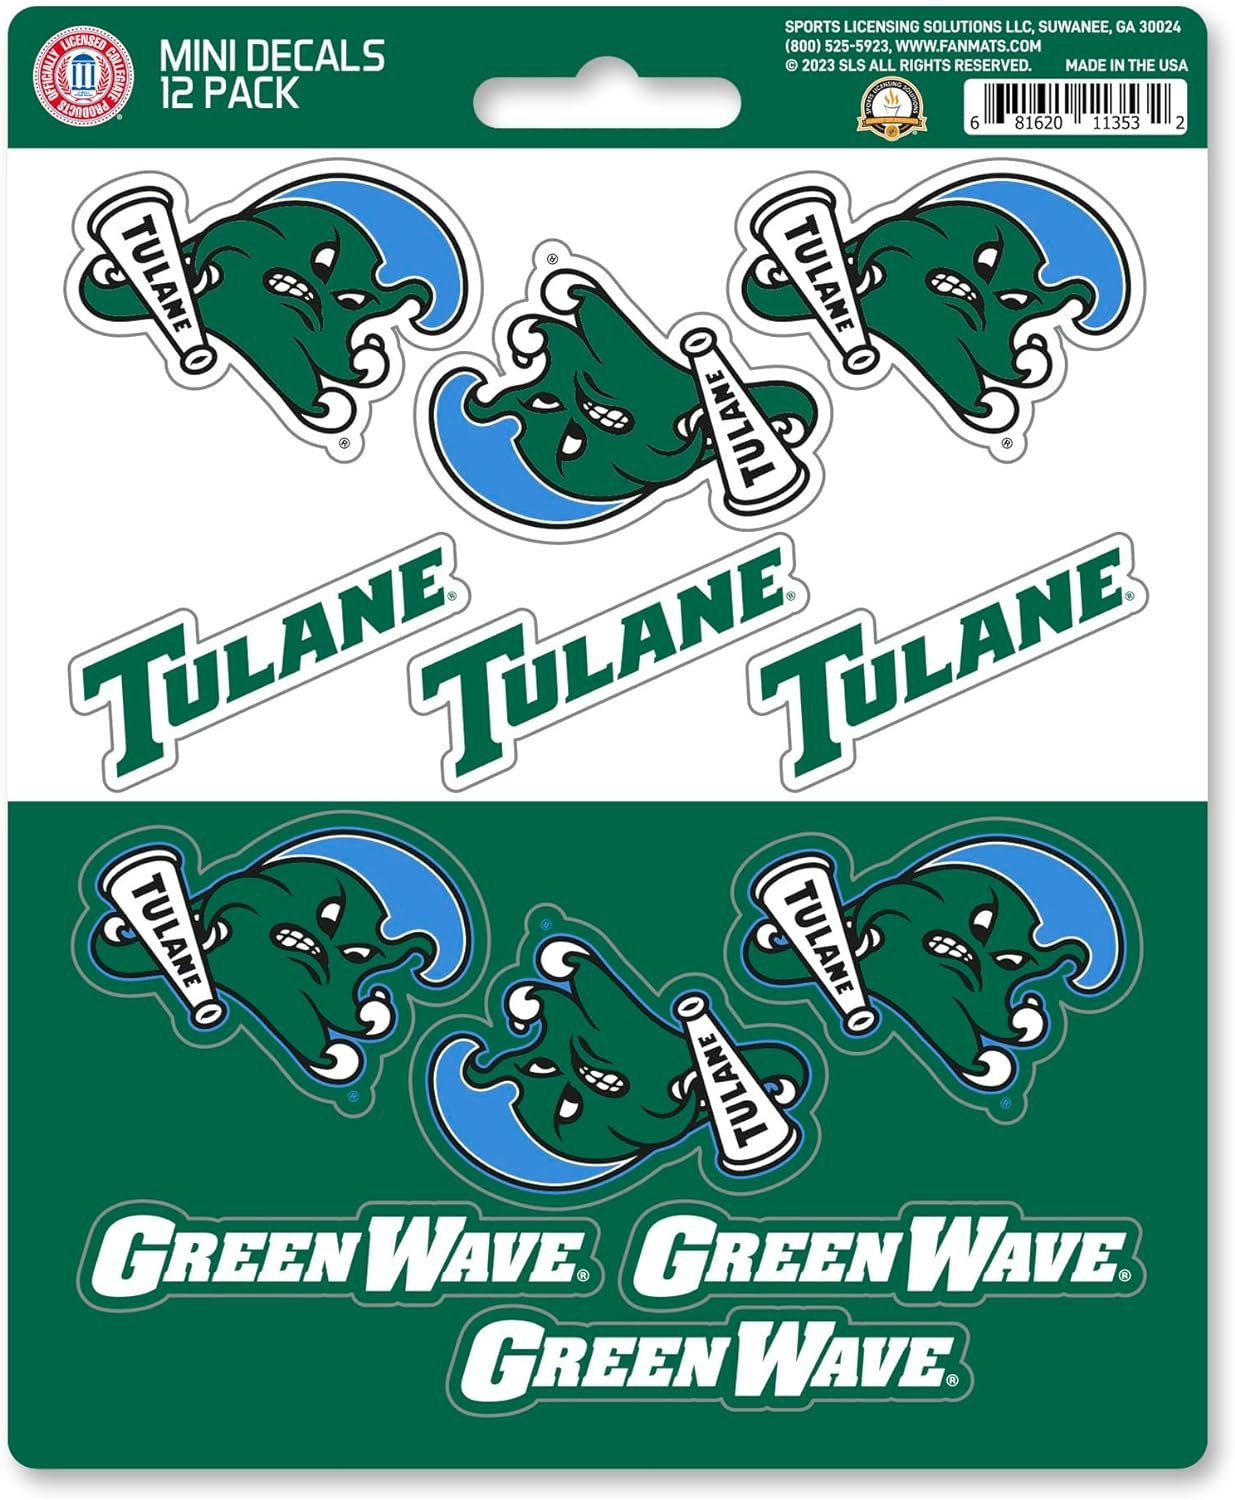 Tulane University Green Wave 12-Piece Mini Decal Sticker Set, 5x6 Inch Sheet, Gift for football fans for any hard surfaces around home, automotive, personal items